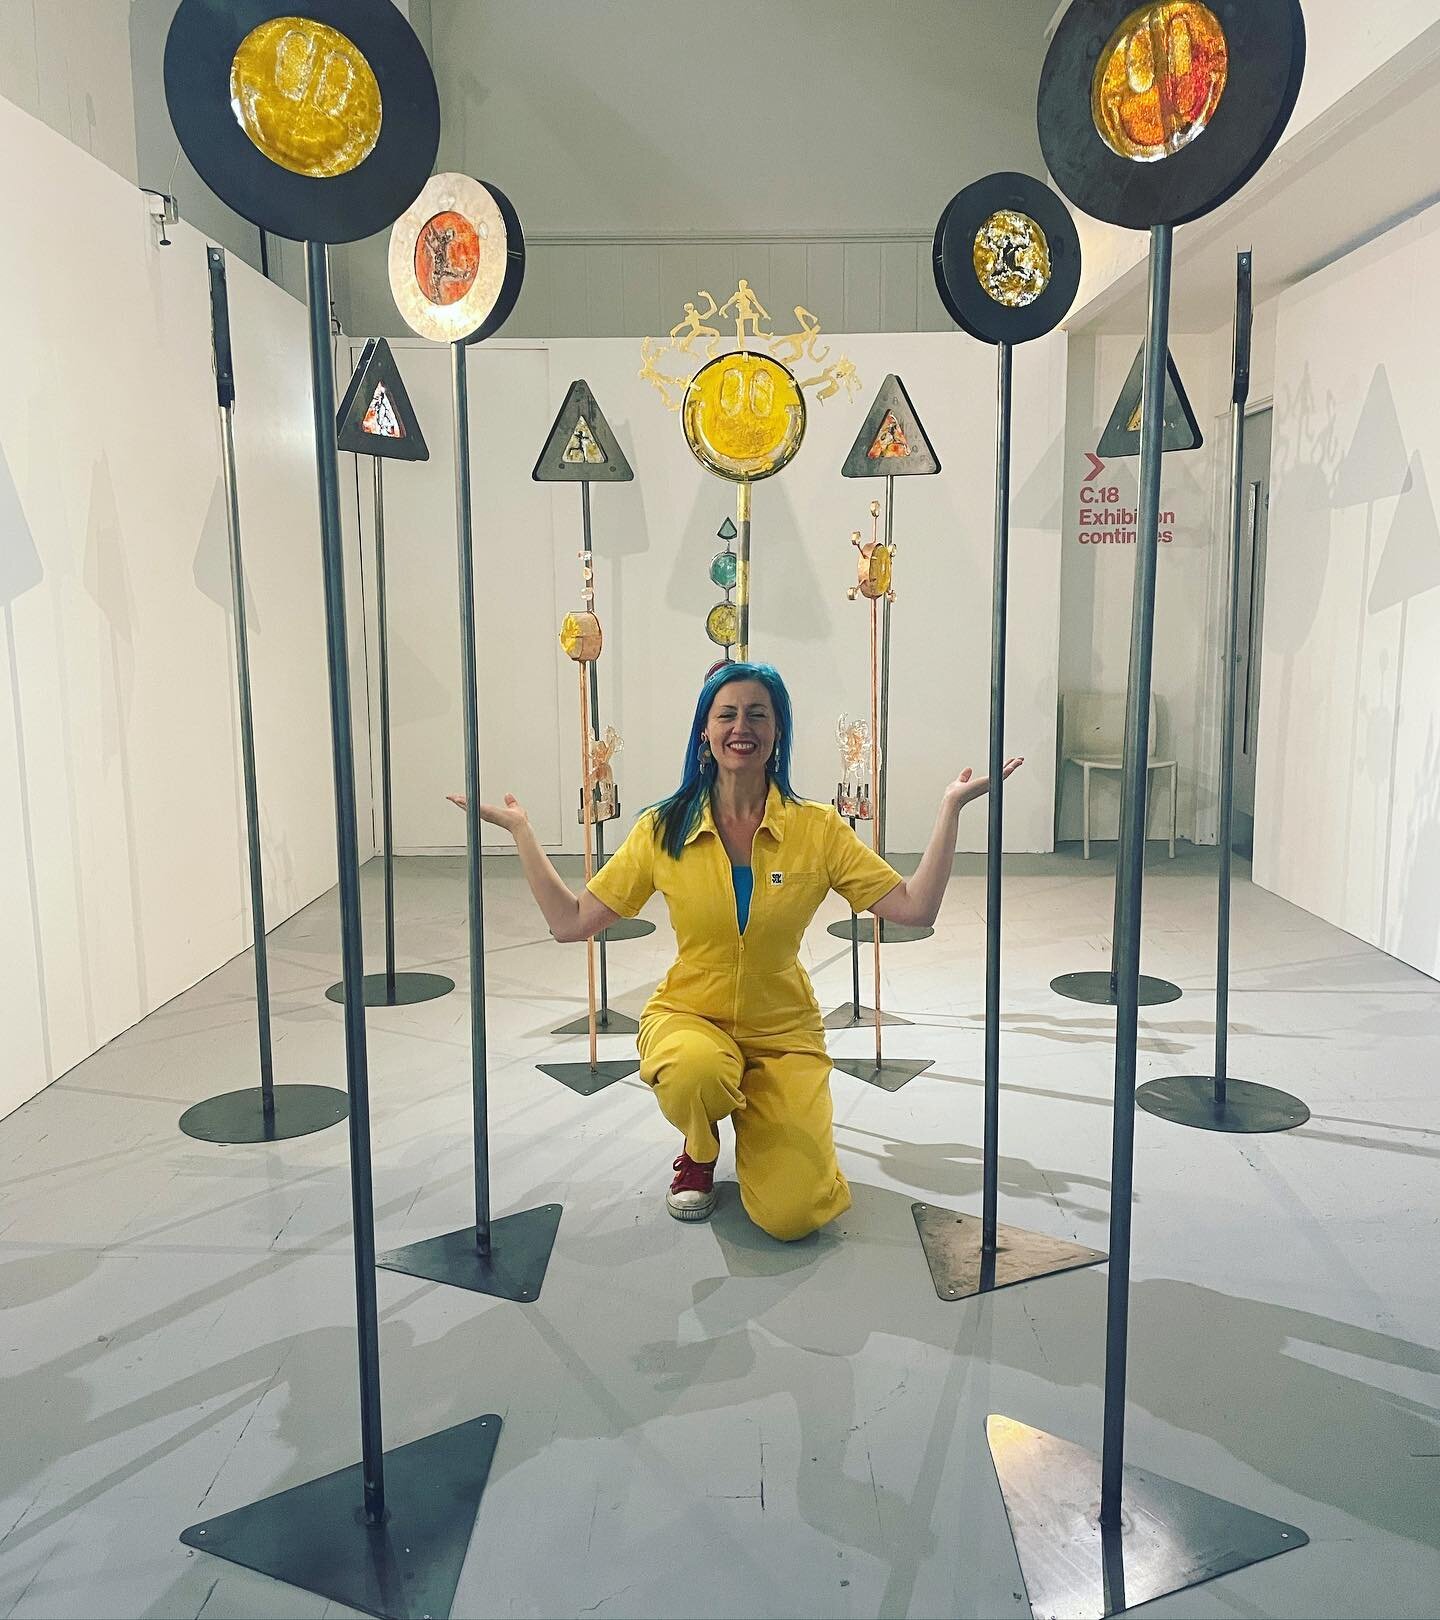 Finished! Posing with my work for my degree show which opens tonight @soa.gallery @edinburghcollegeofart @edinburghuniversity  #ritualcircle #archaeologyofrave #glass #totems #sculpture #contemporaryart #ravedirections #degreeshow